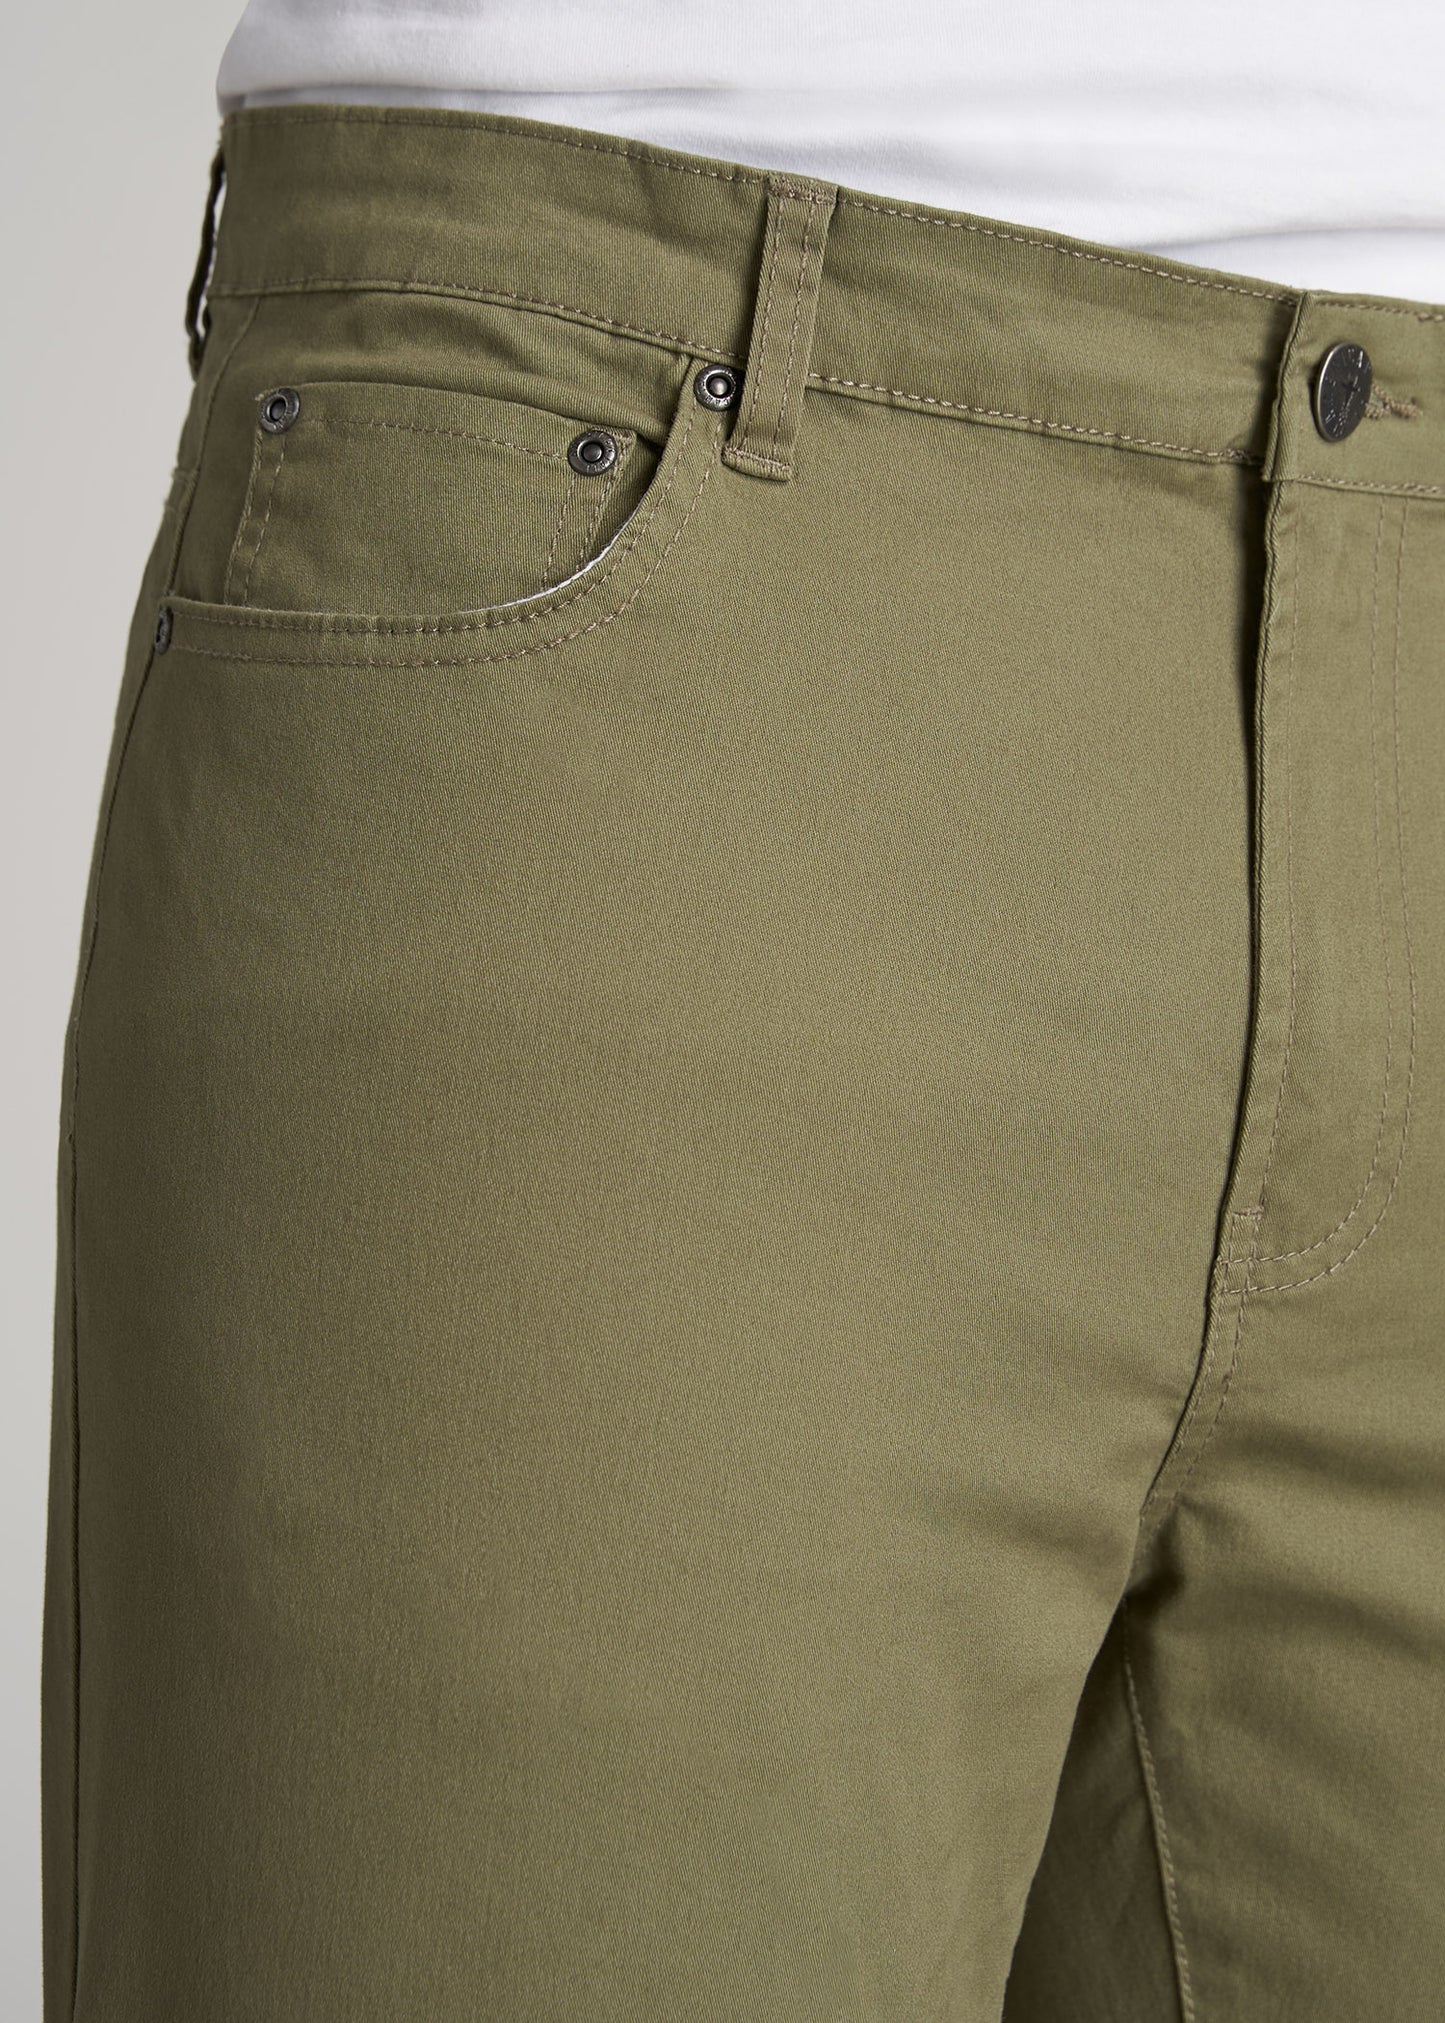 Dylan SLIM FIT Five-Pocket Pants For Tall Men in Fatigue Green